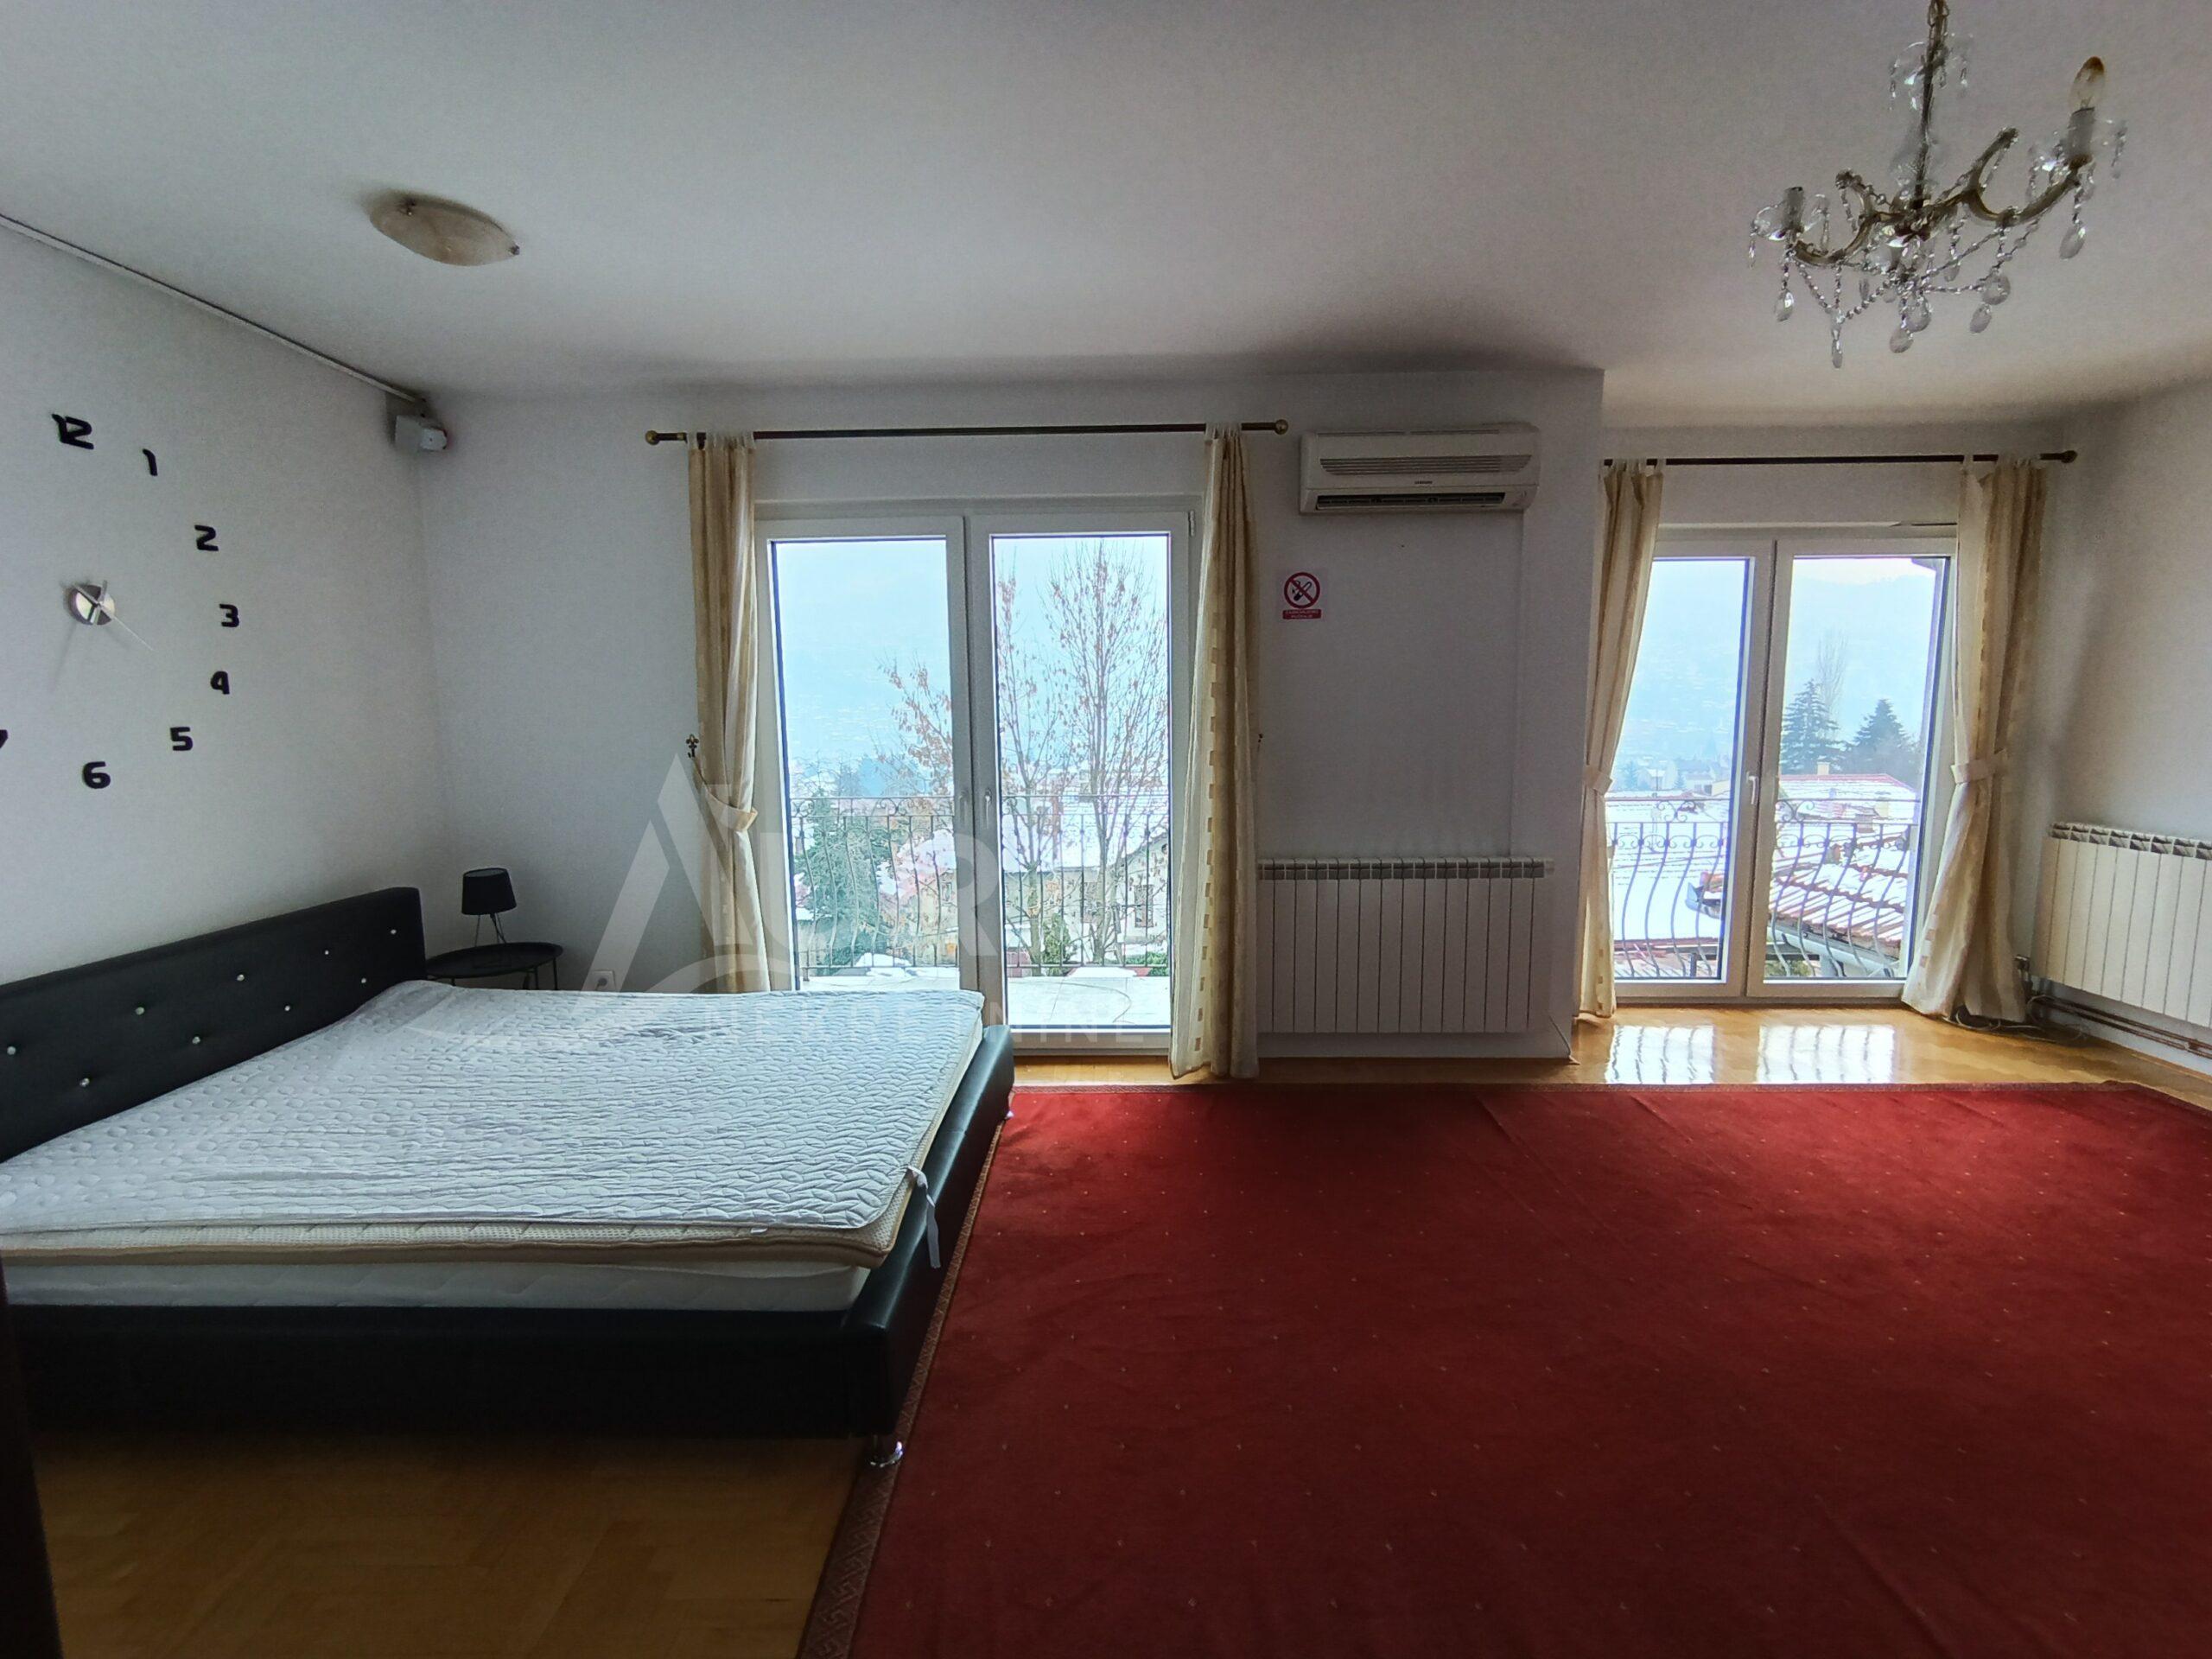 Extra house for rent / 250m2 /Sarajevo / Old town